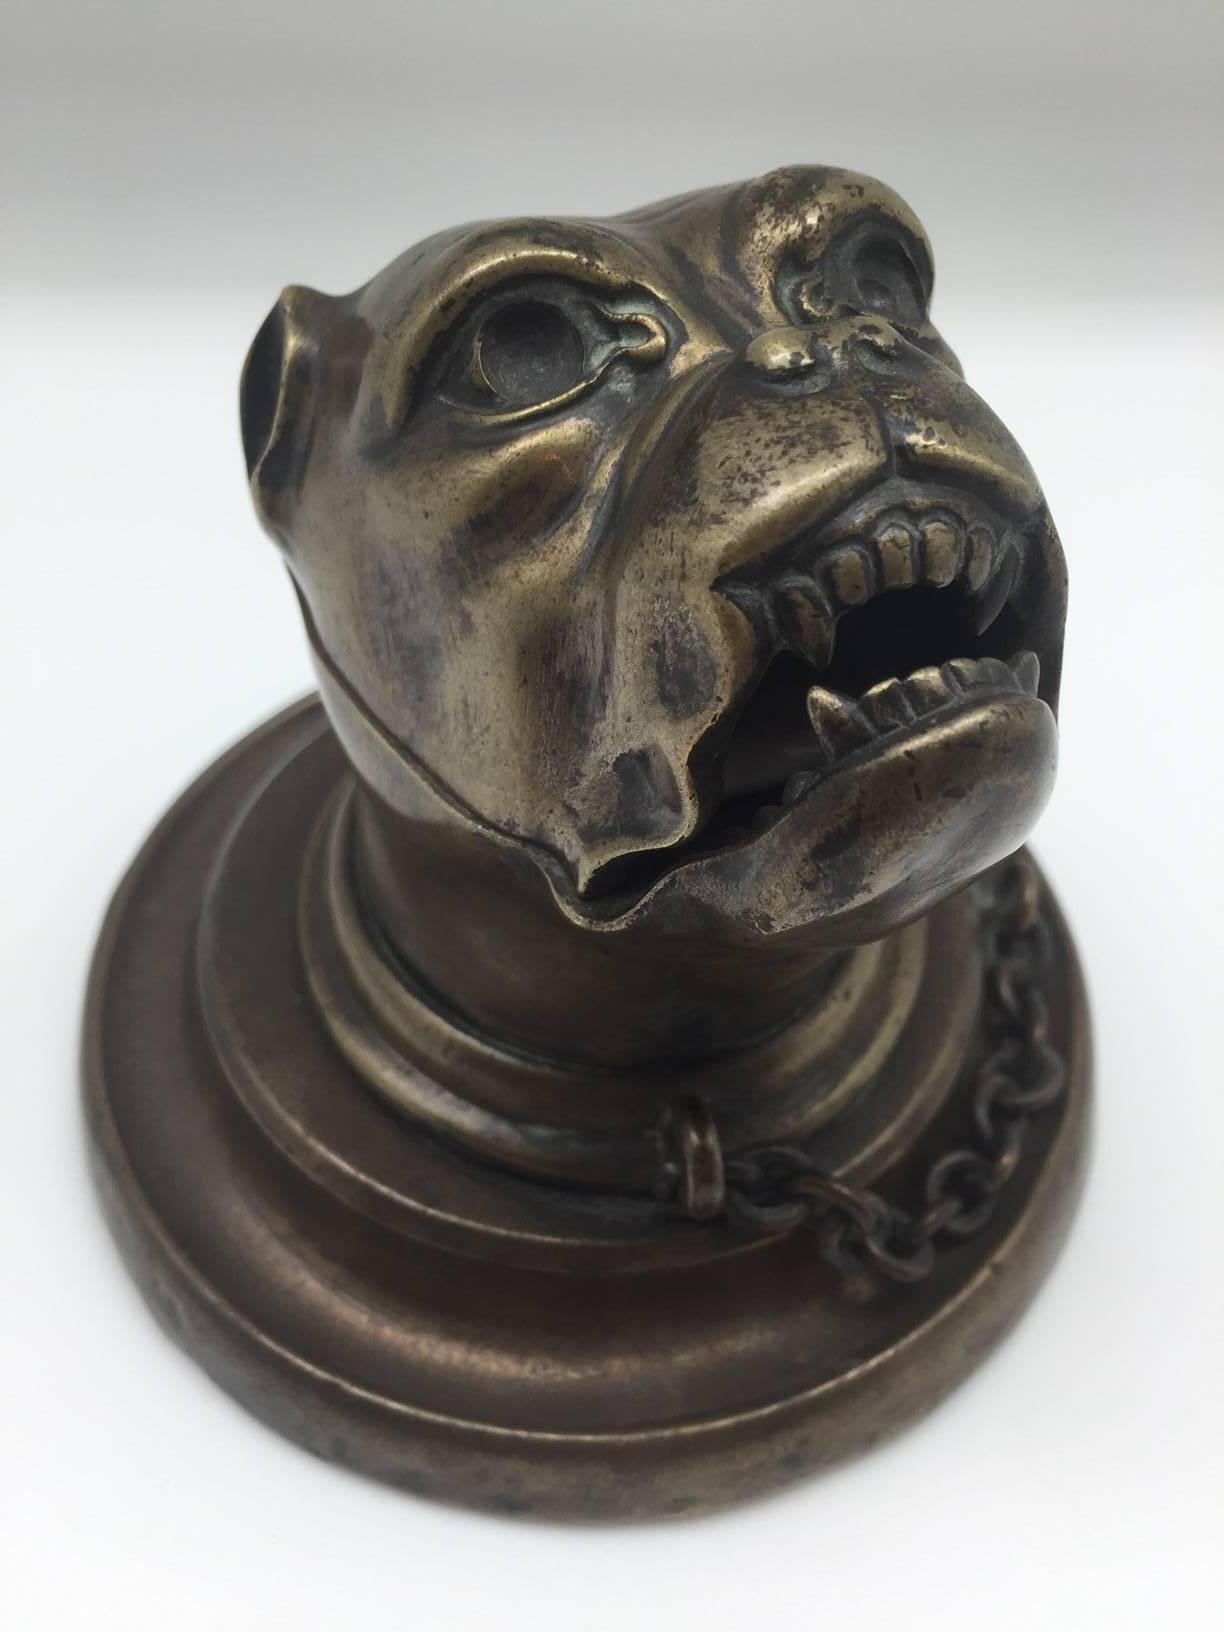 19th century bronze growling dog inkwell with collar and chain. This piece still has its original ink vessel.